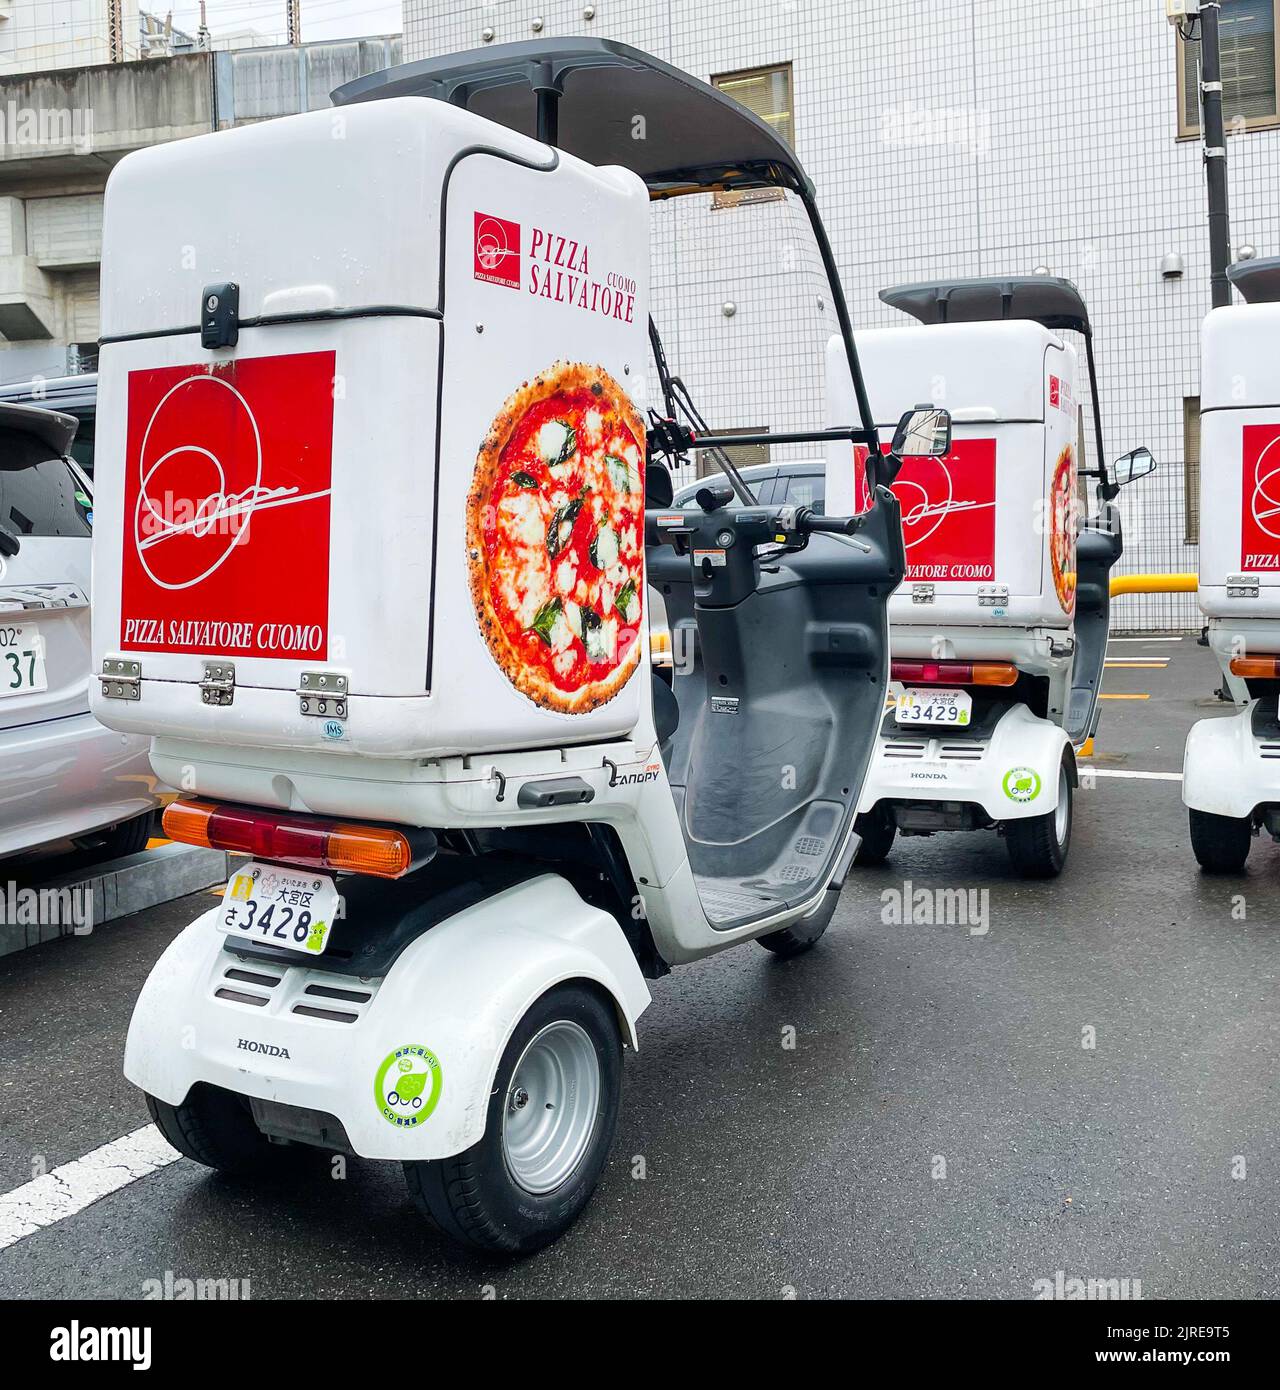 A rear picture of Three 3 Wheel Mobility Scooter Balance Delivery Motorcycles for pizza Salvatore with Roofs parked in a parking lot. Stock Photo